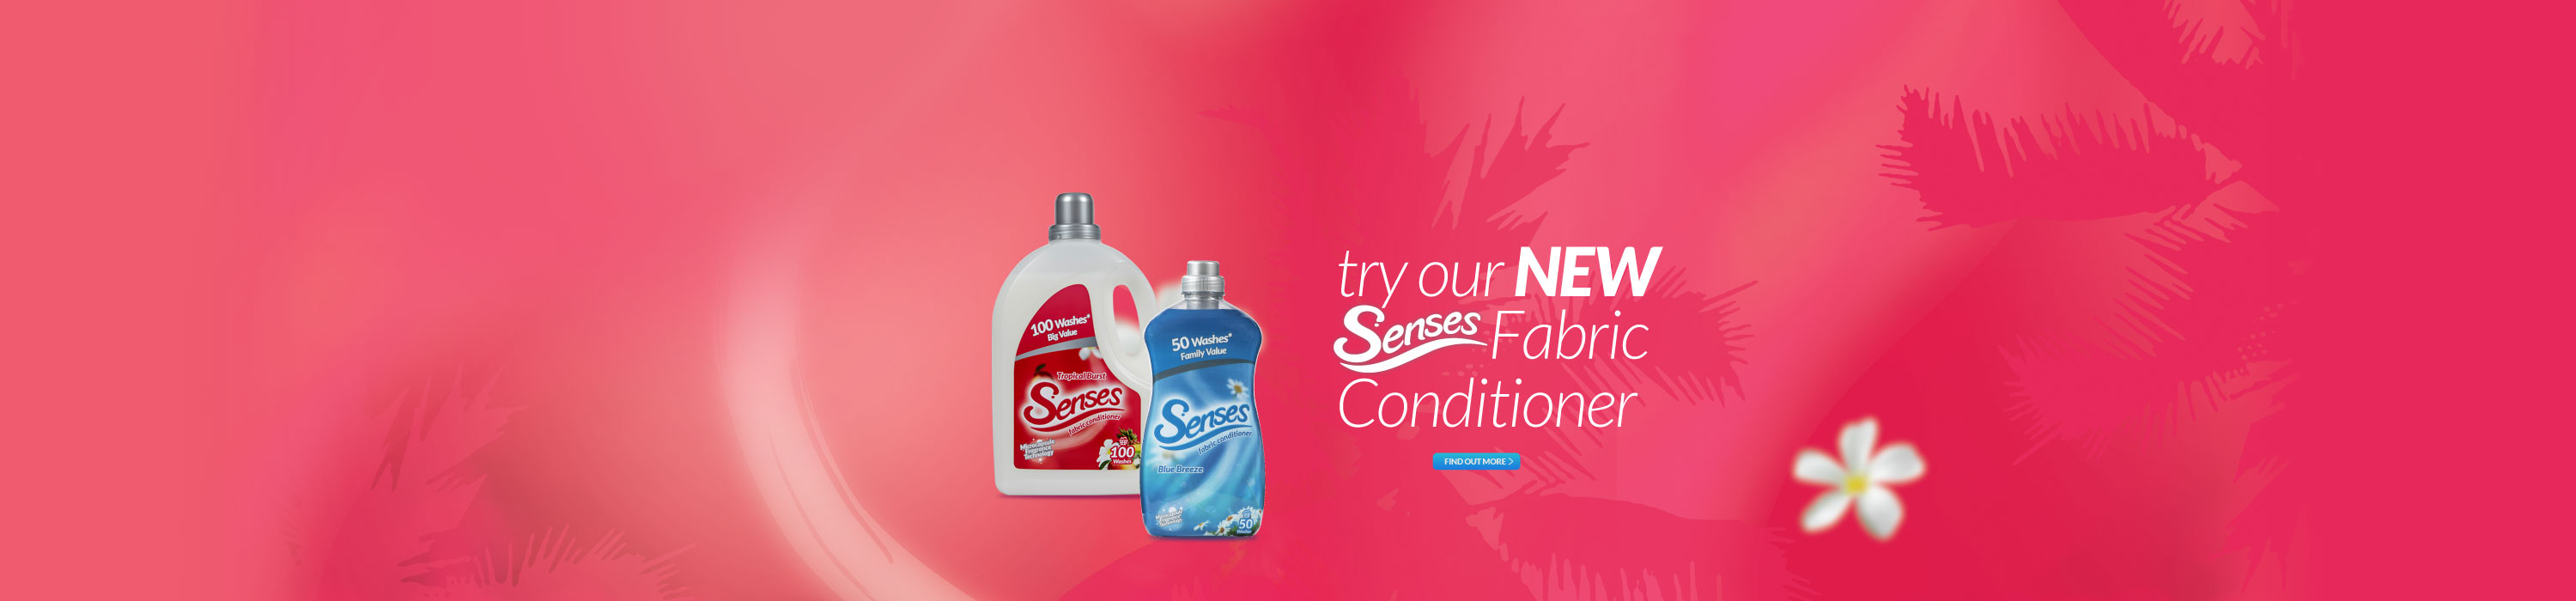 Try our new senses fabric conditioner